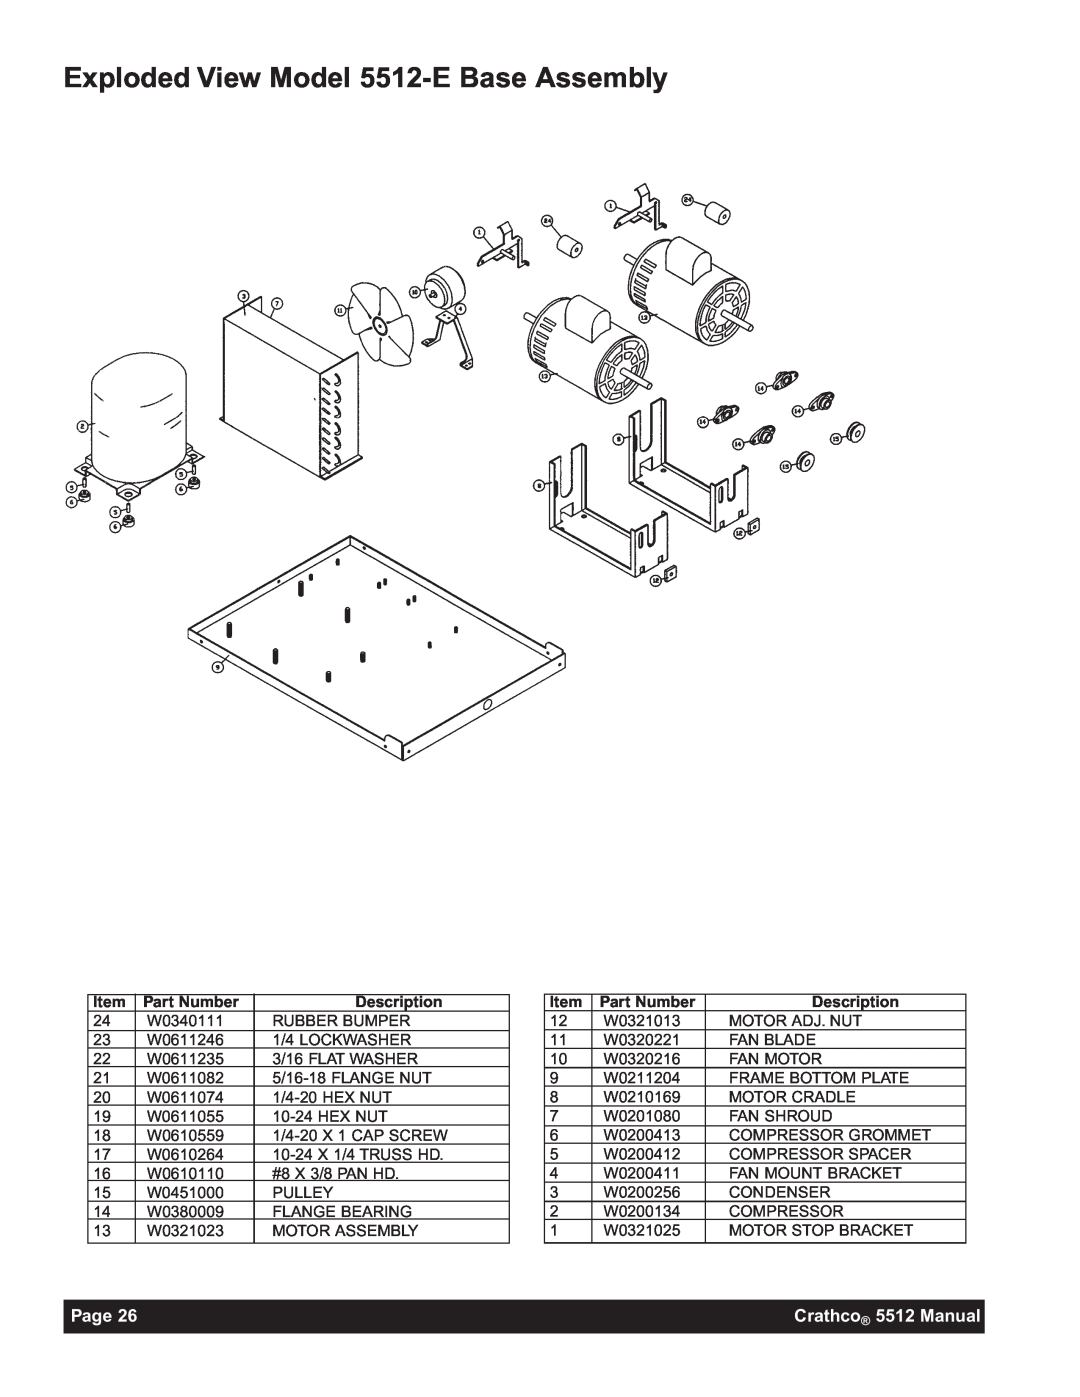 Grindmaster 5512E instruction manual Exploded View Model 5512-E Base Assembly, Page, Crathco 5512 Manual 